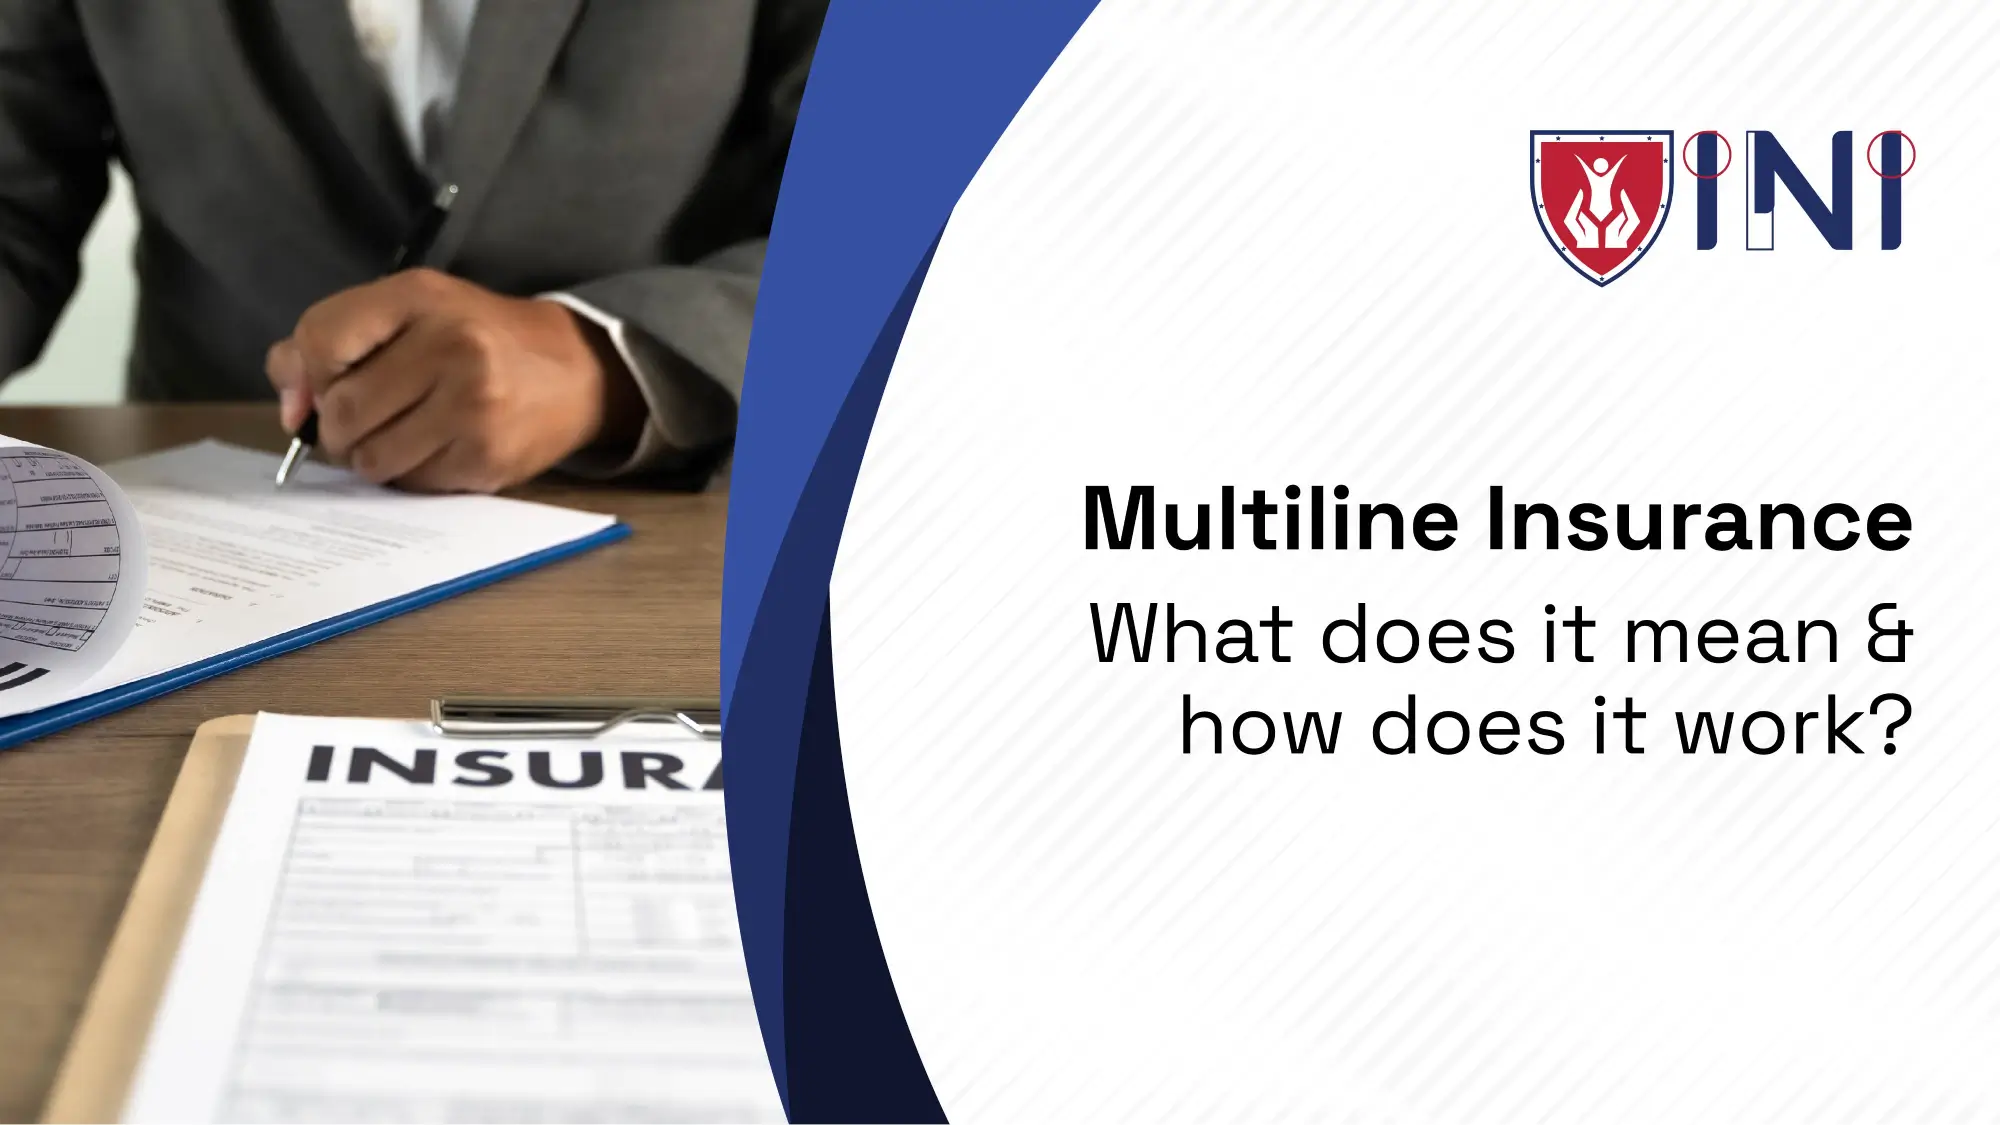 Multiline Insurance: What does it mean & how does it work?